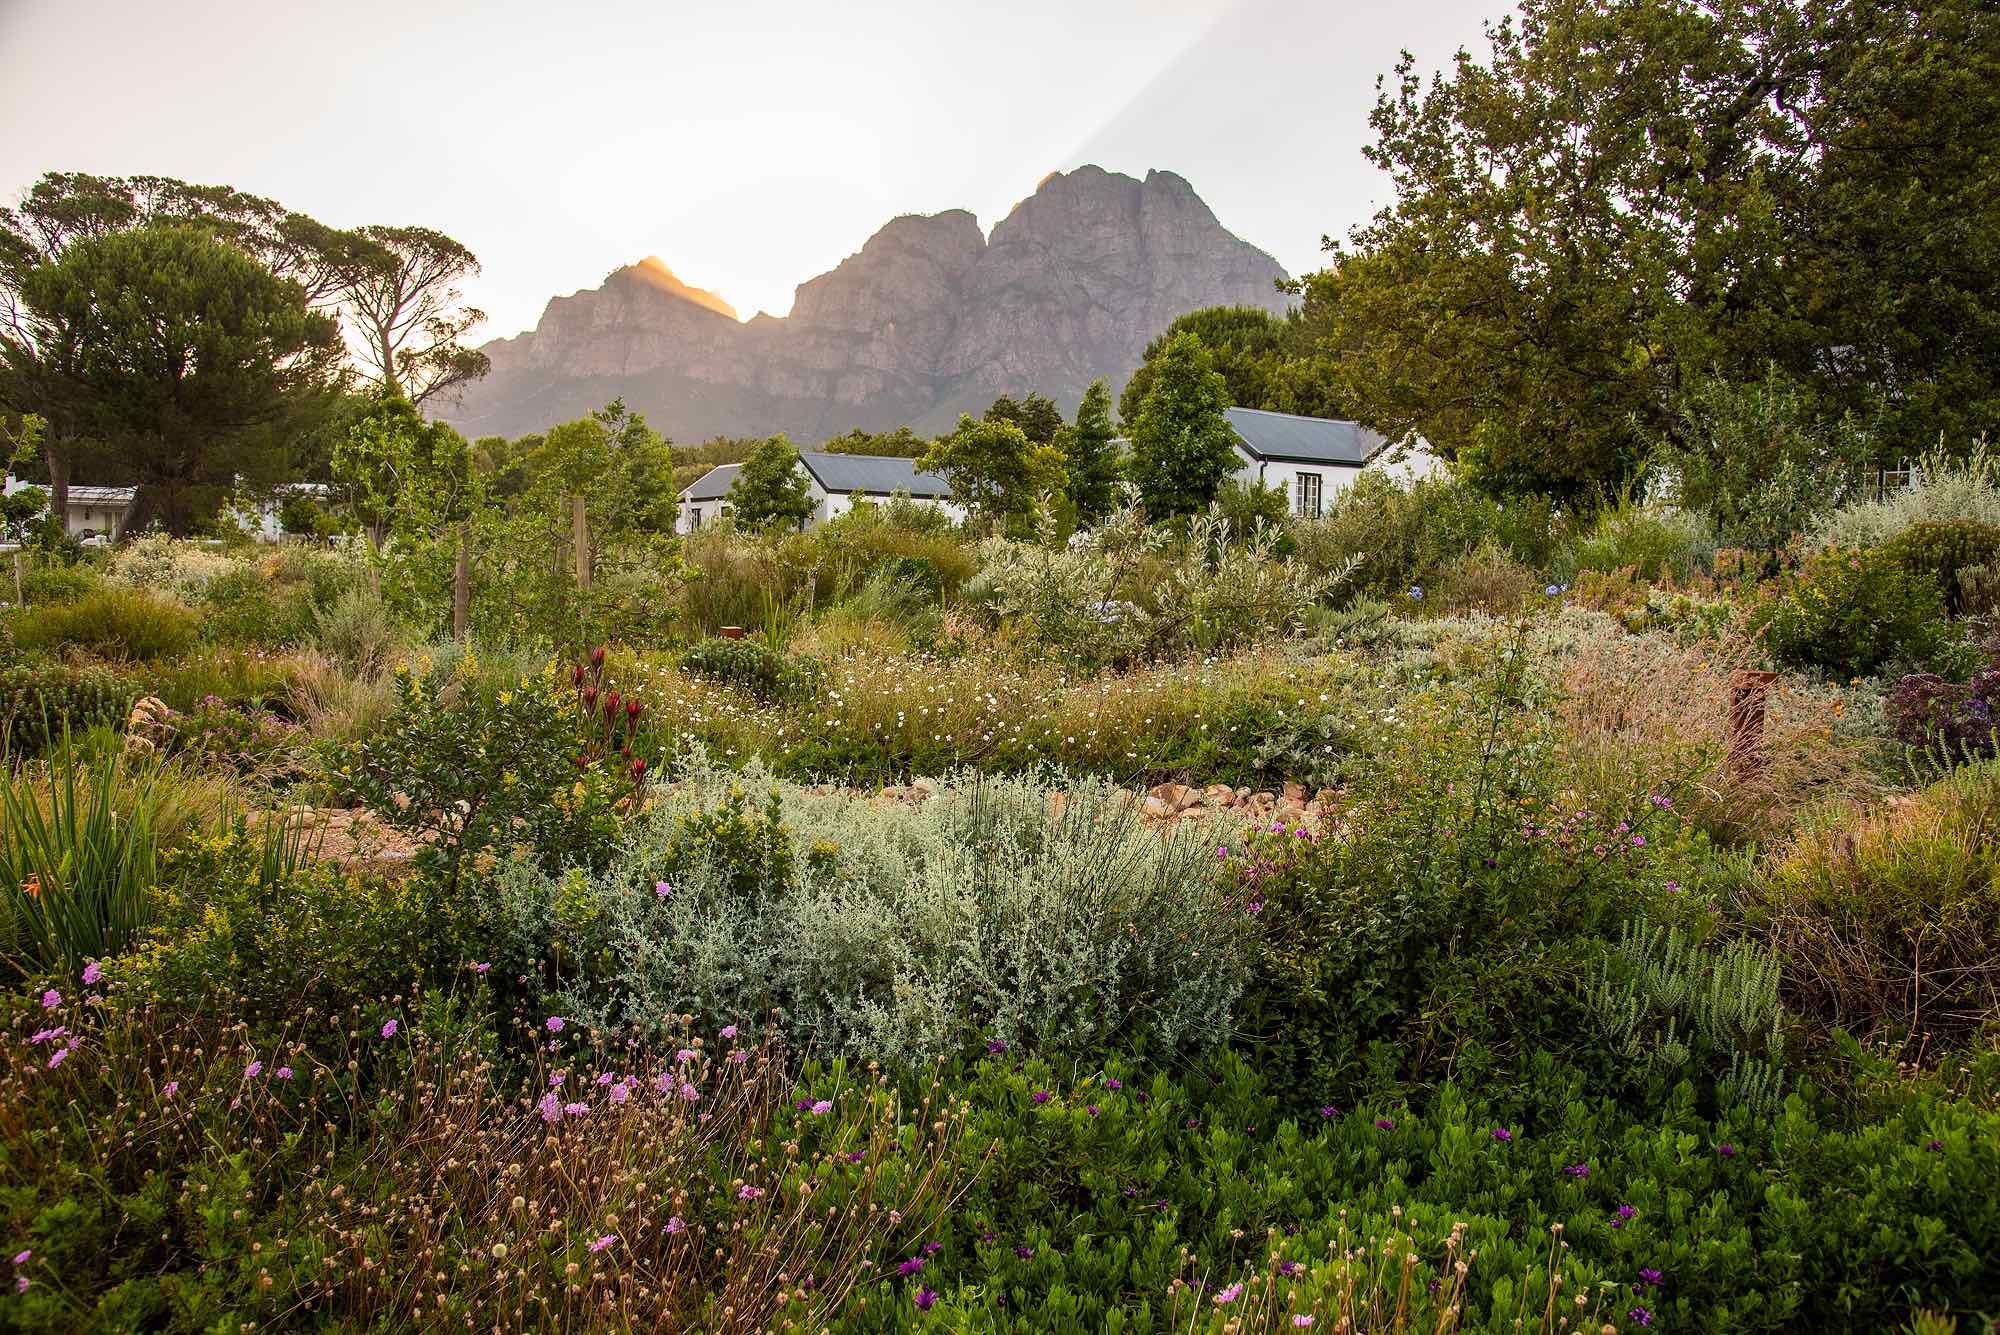 Franschhoek has some of the best accommodation in South Africa. This list will help you find the best boutique hotels to make your trip ideal! Photo credit Bonschendal.